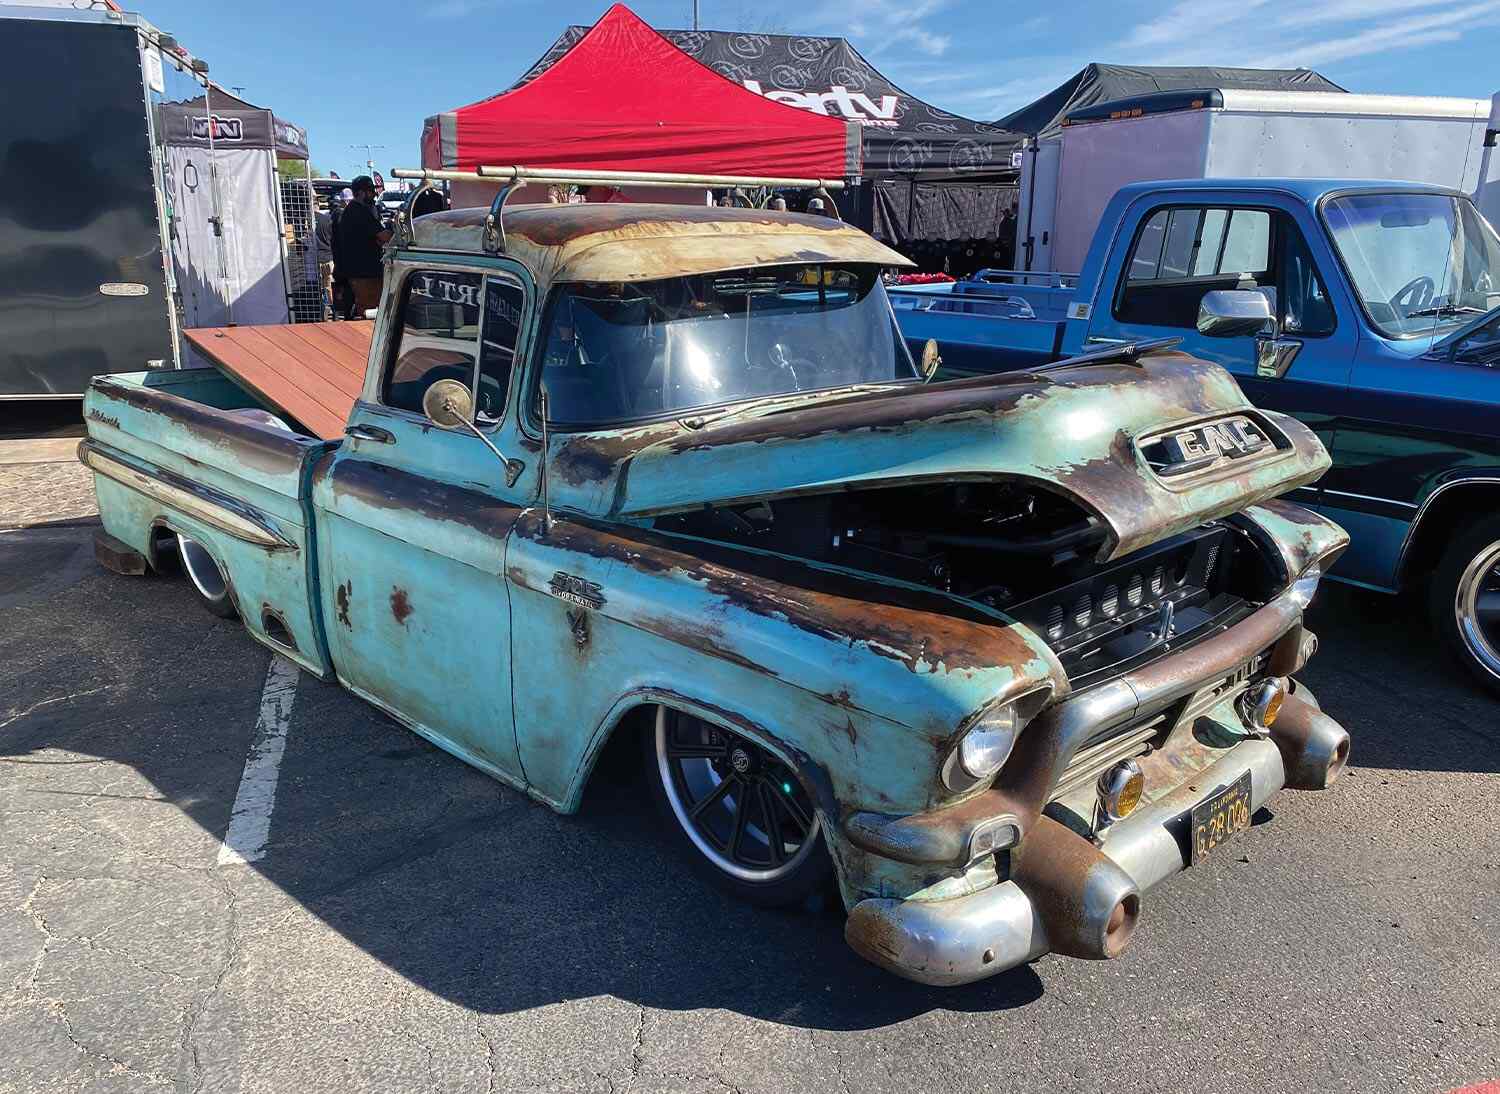 three quarter passenger side view of a teal patina GMC classic truck with its bed and hood slightly raised